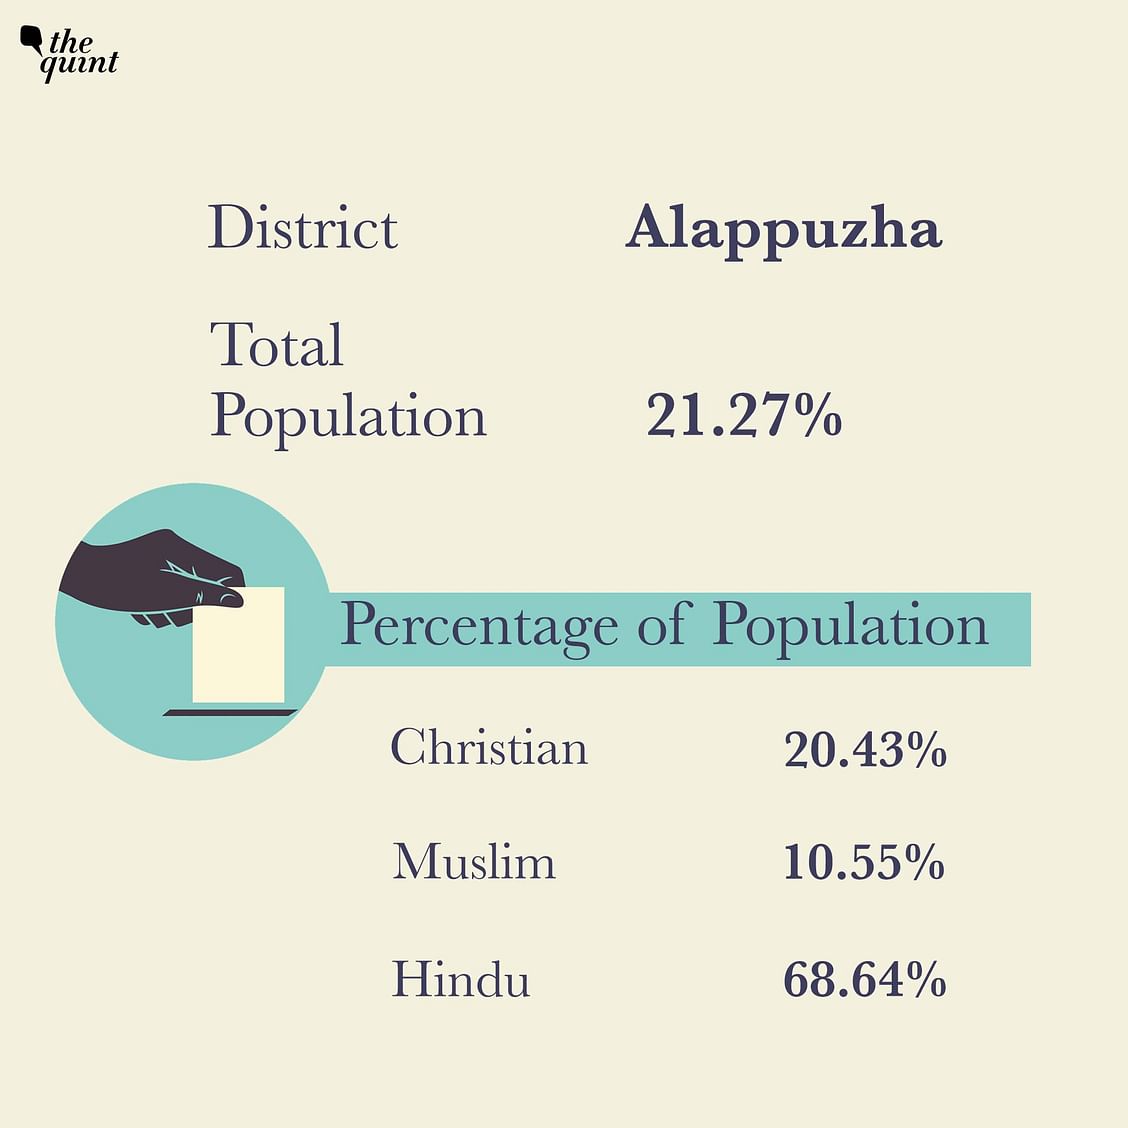 Christians form 20.43 per cent of the population in Alappuzha district.